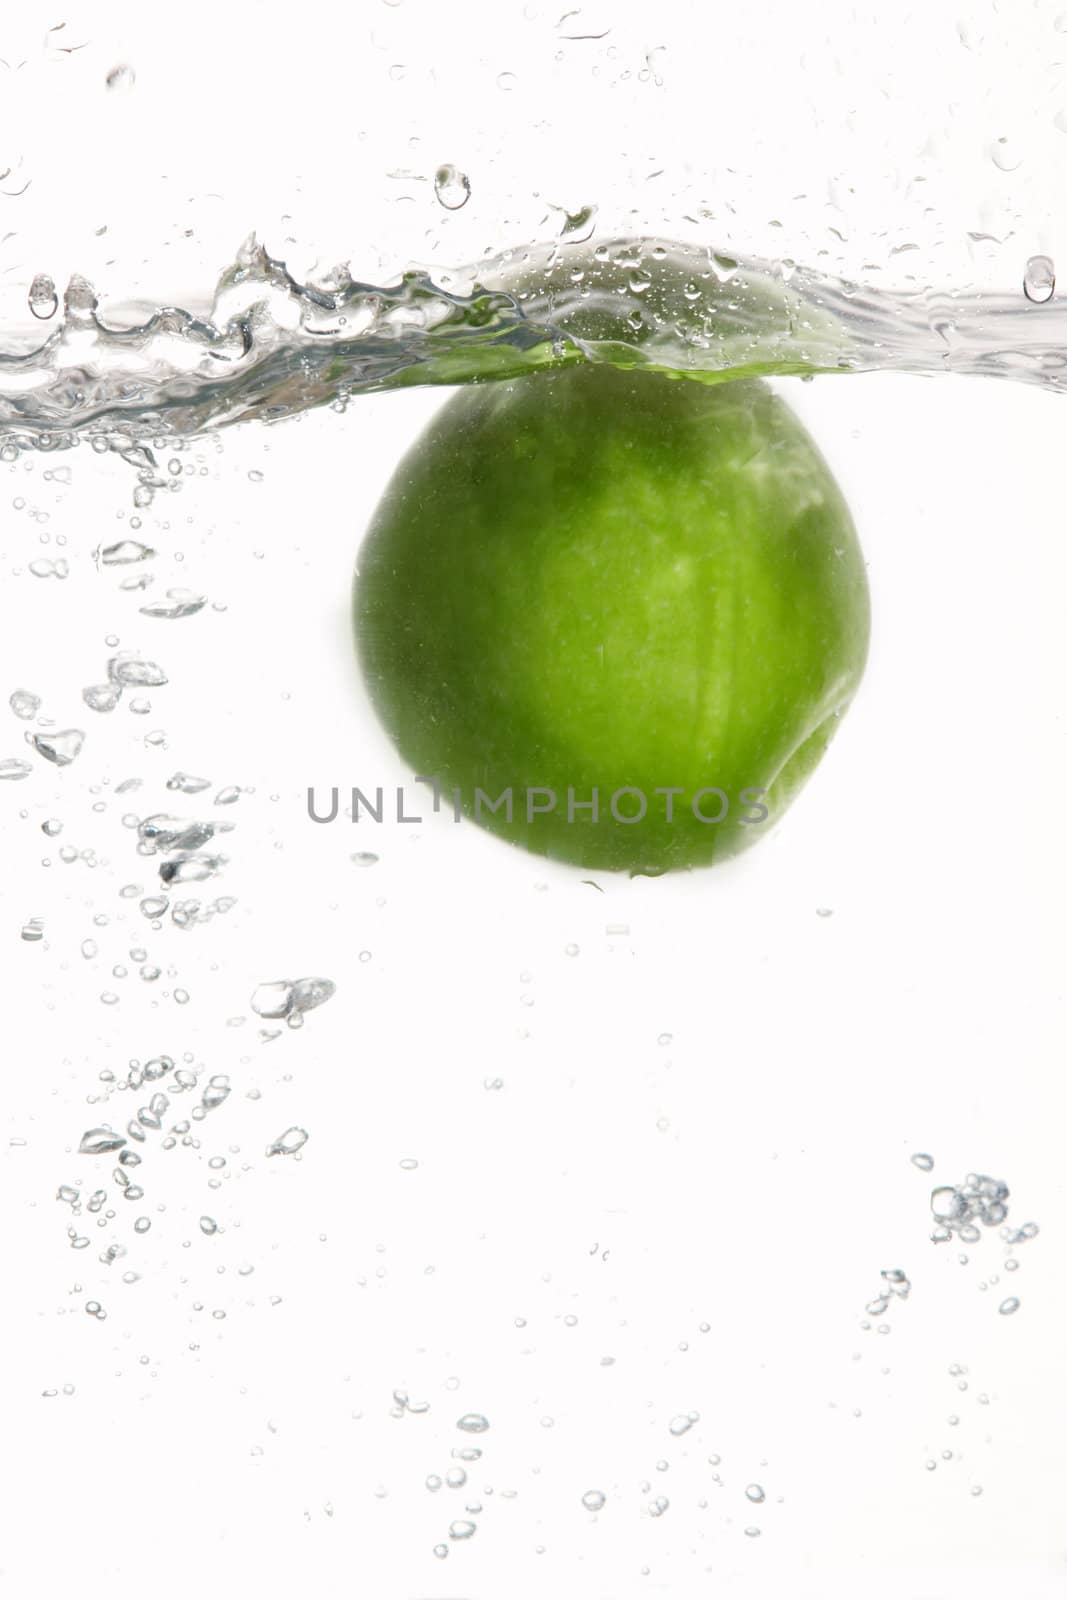 An image of fresh green apple in water